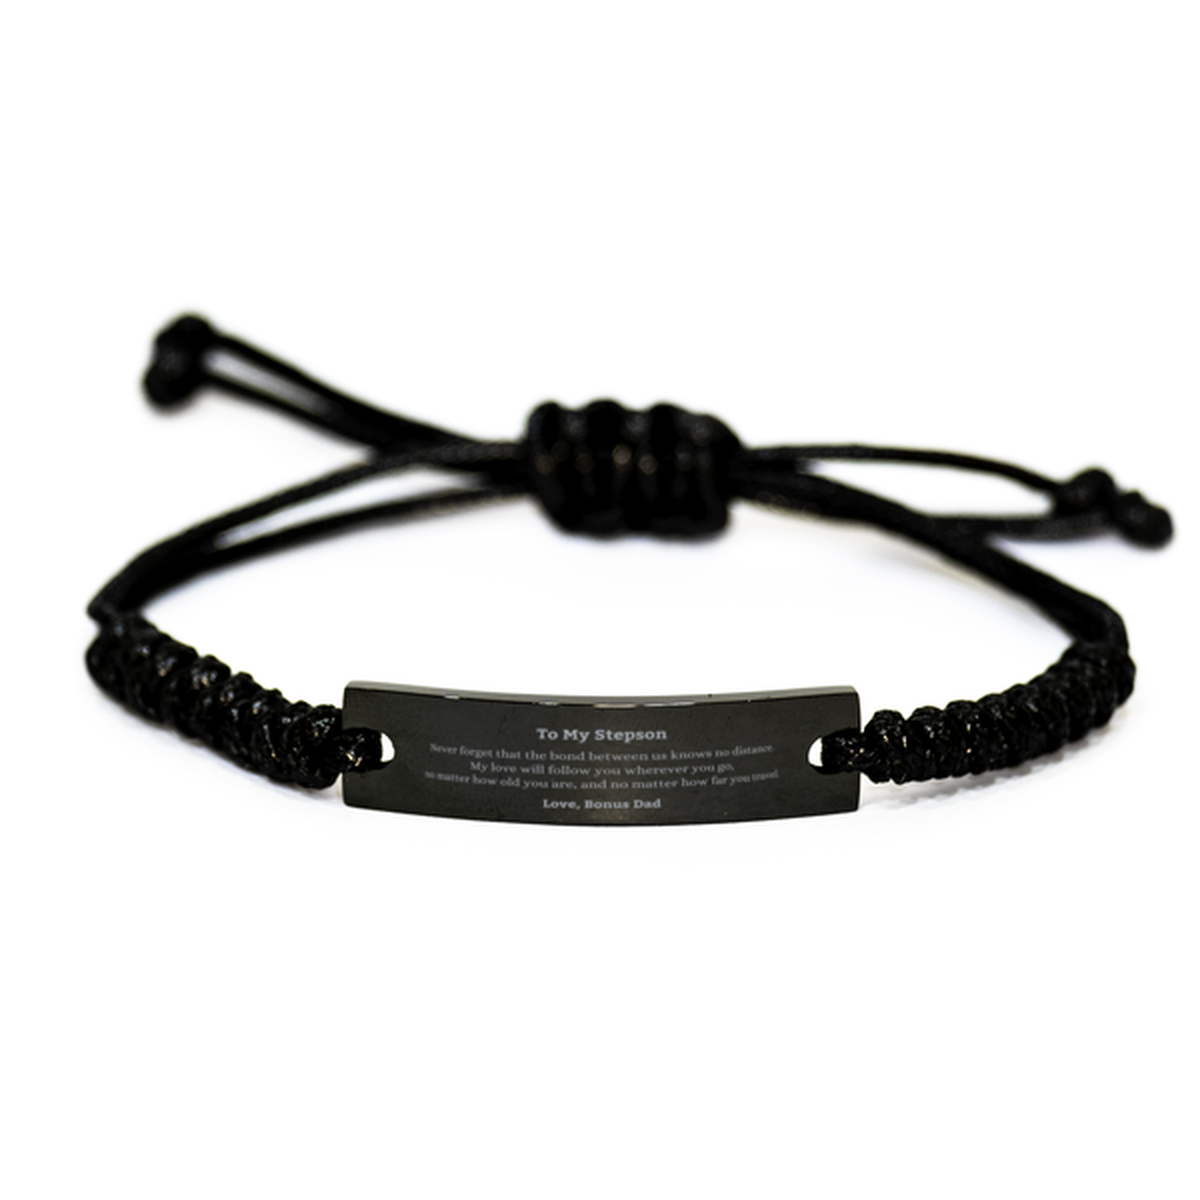 Stepson Birthday Gifts from Bonus Dad, Adjustable Black Rope Bracelet for Stepson Christmas Graduation Unique Gifts Stepson Never forget that the bond between us knows no distance. Love, Bonus Dad